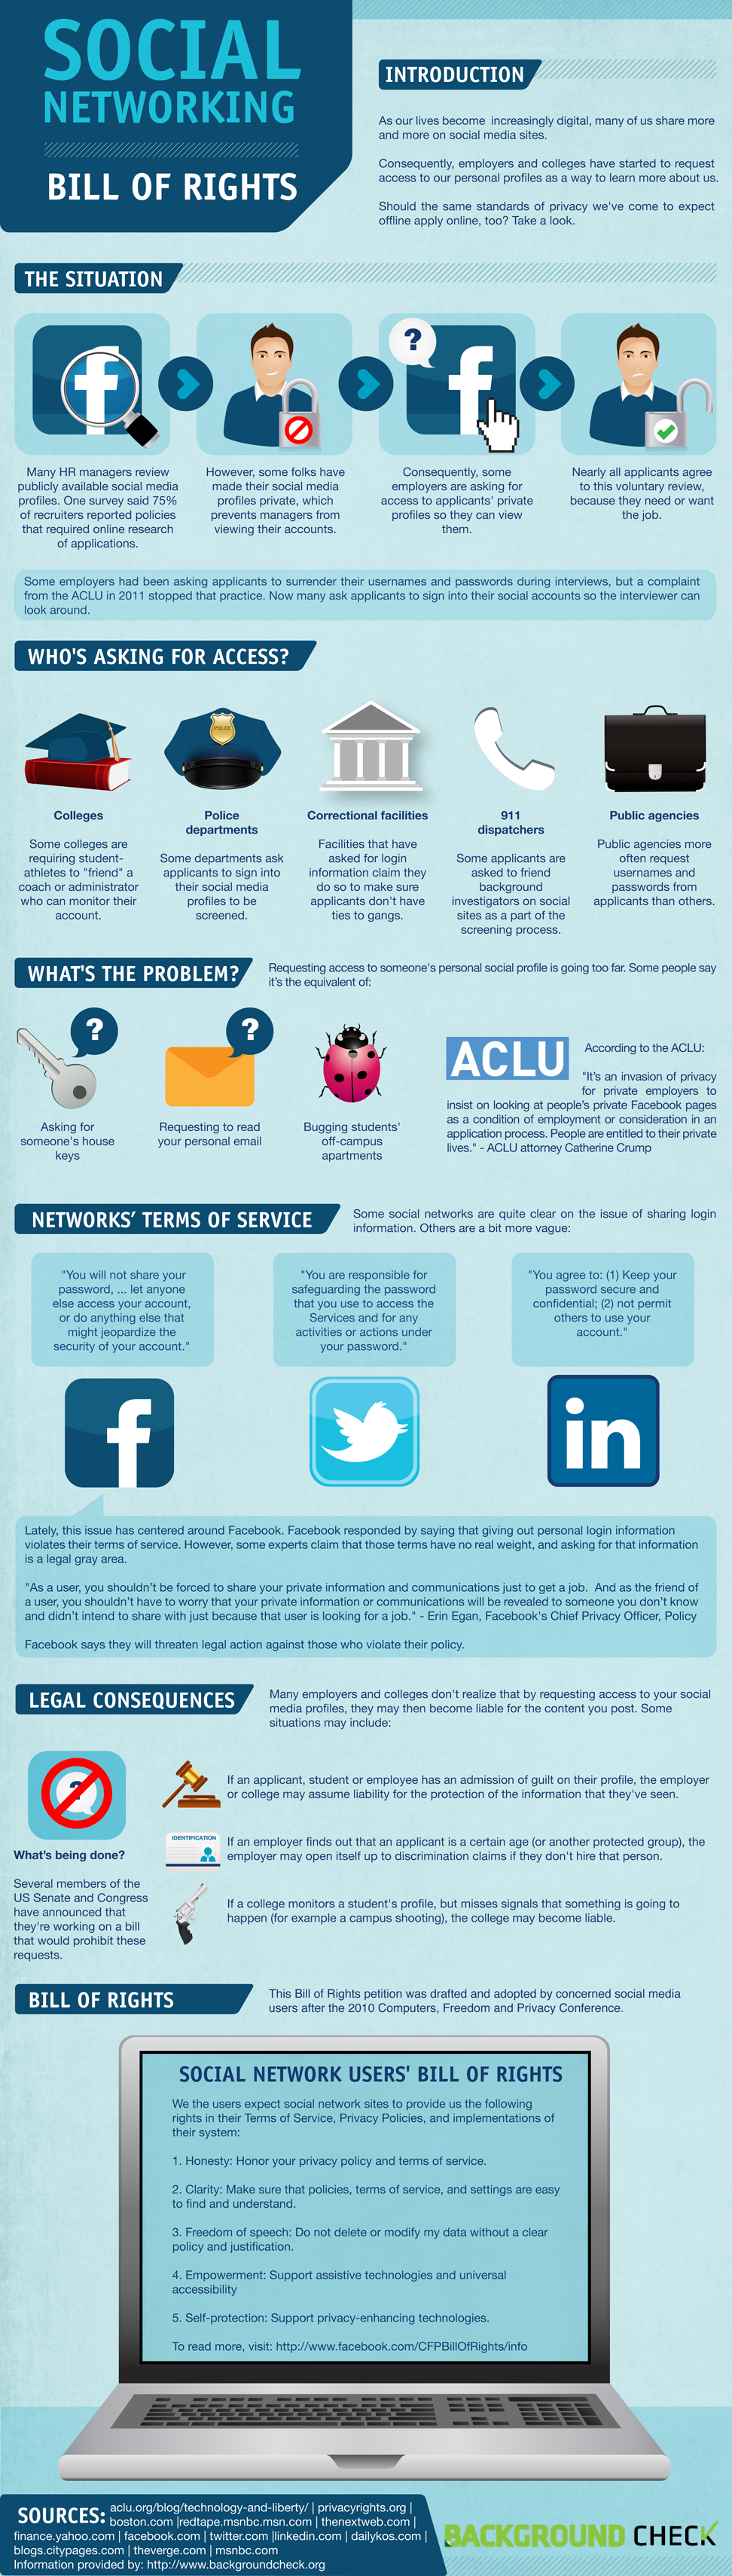 What's Your Social Networks Bill of Rights? [INFOGRAPHIC]